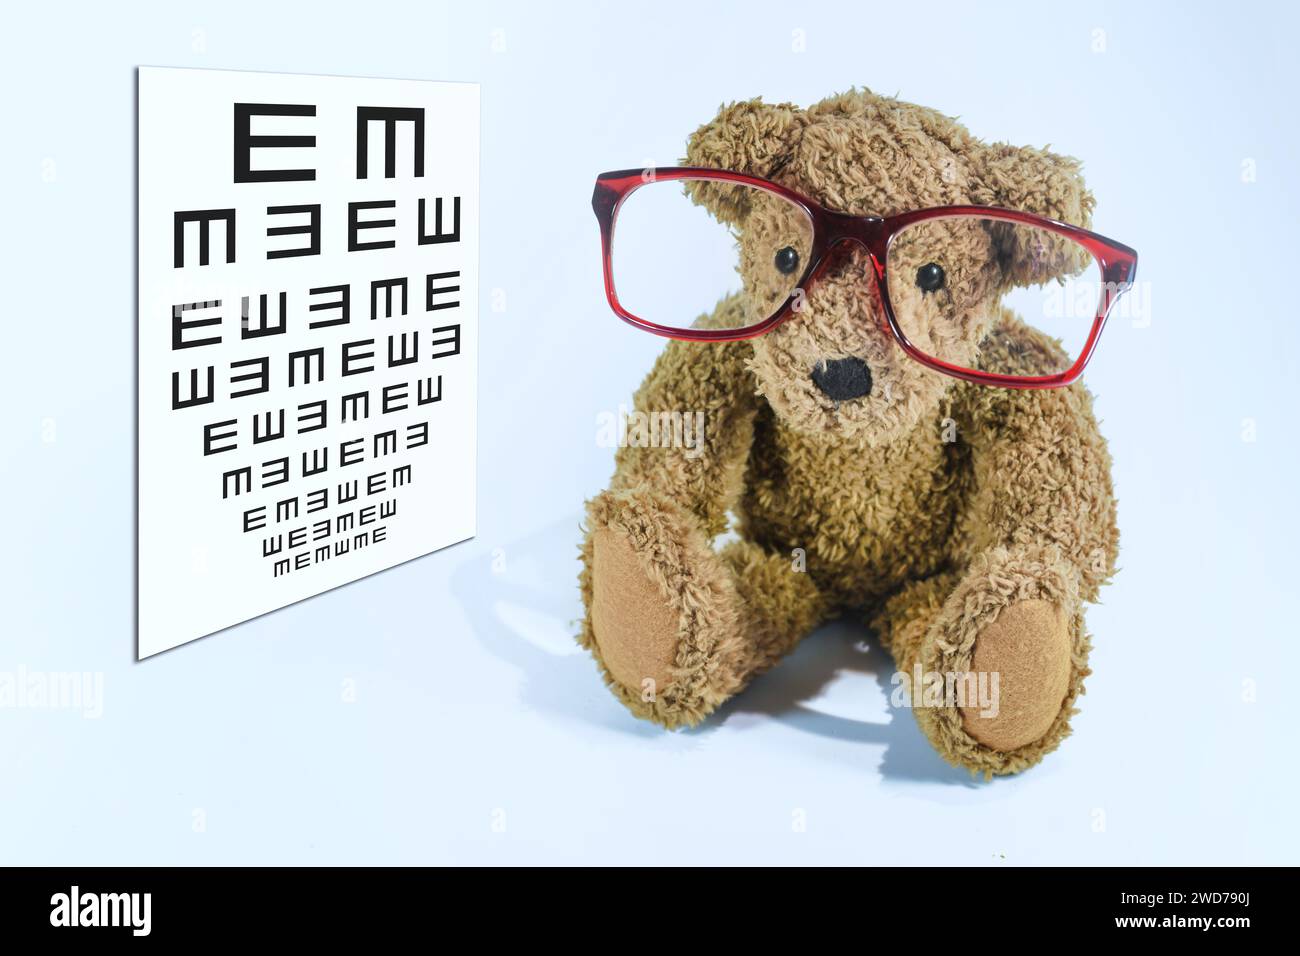 Little teddy bear with big red glasses sitting beside a pediatric vision screening chart, concept of eye care and ophthalmology for children, light bl Stock Photo